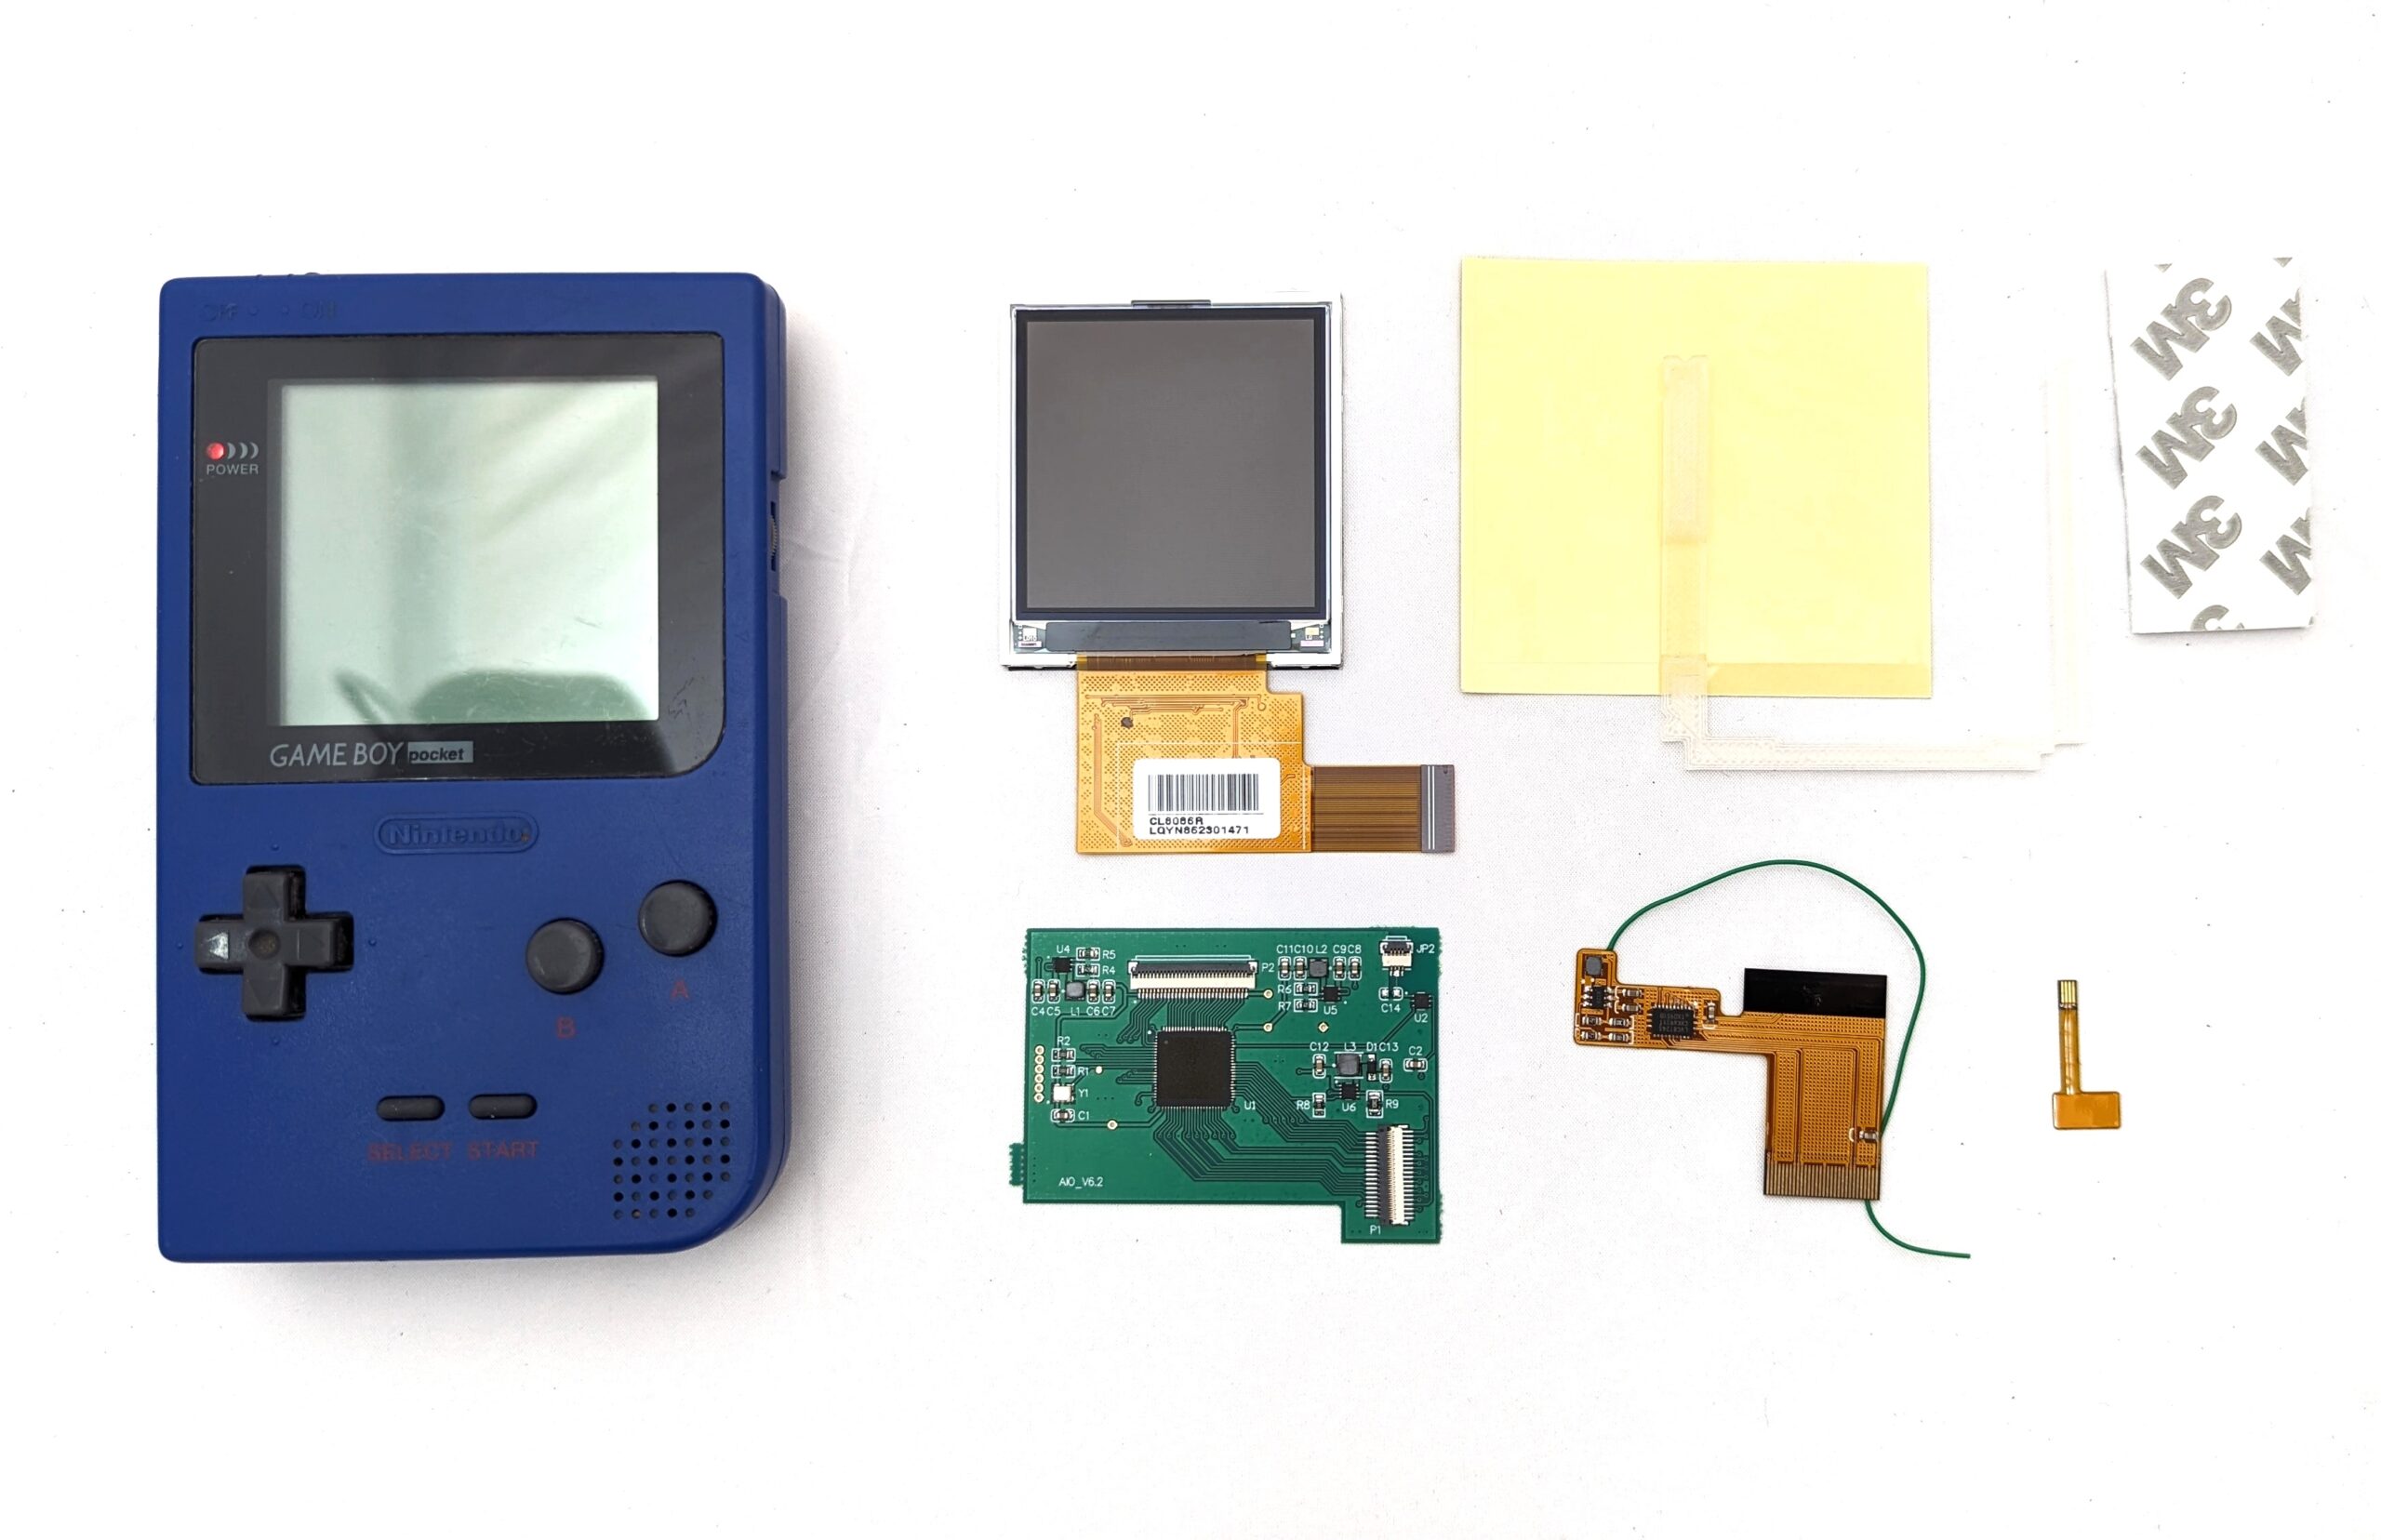 A blue game boy sits next to a collection of modding supplies, including materials and technical components.